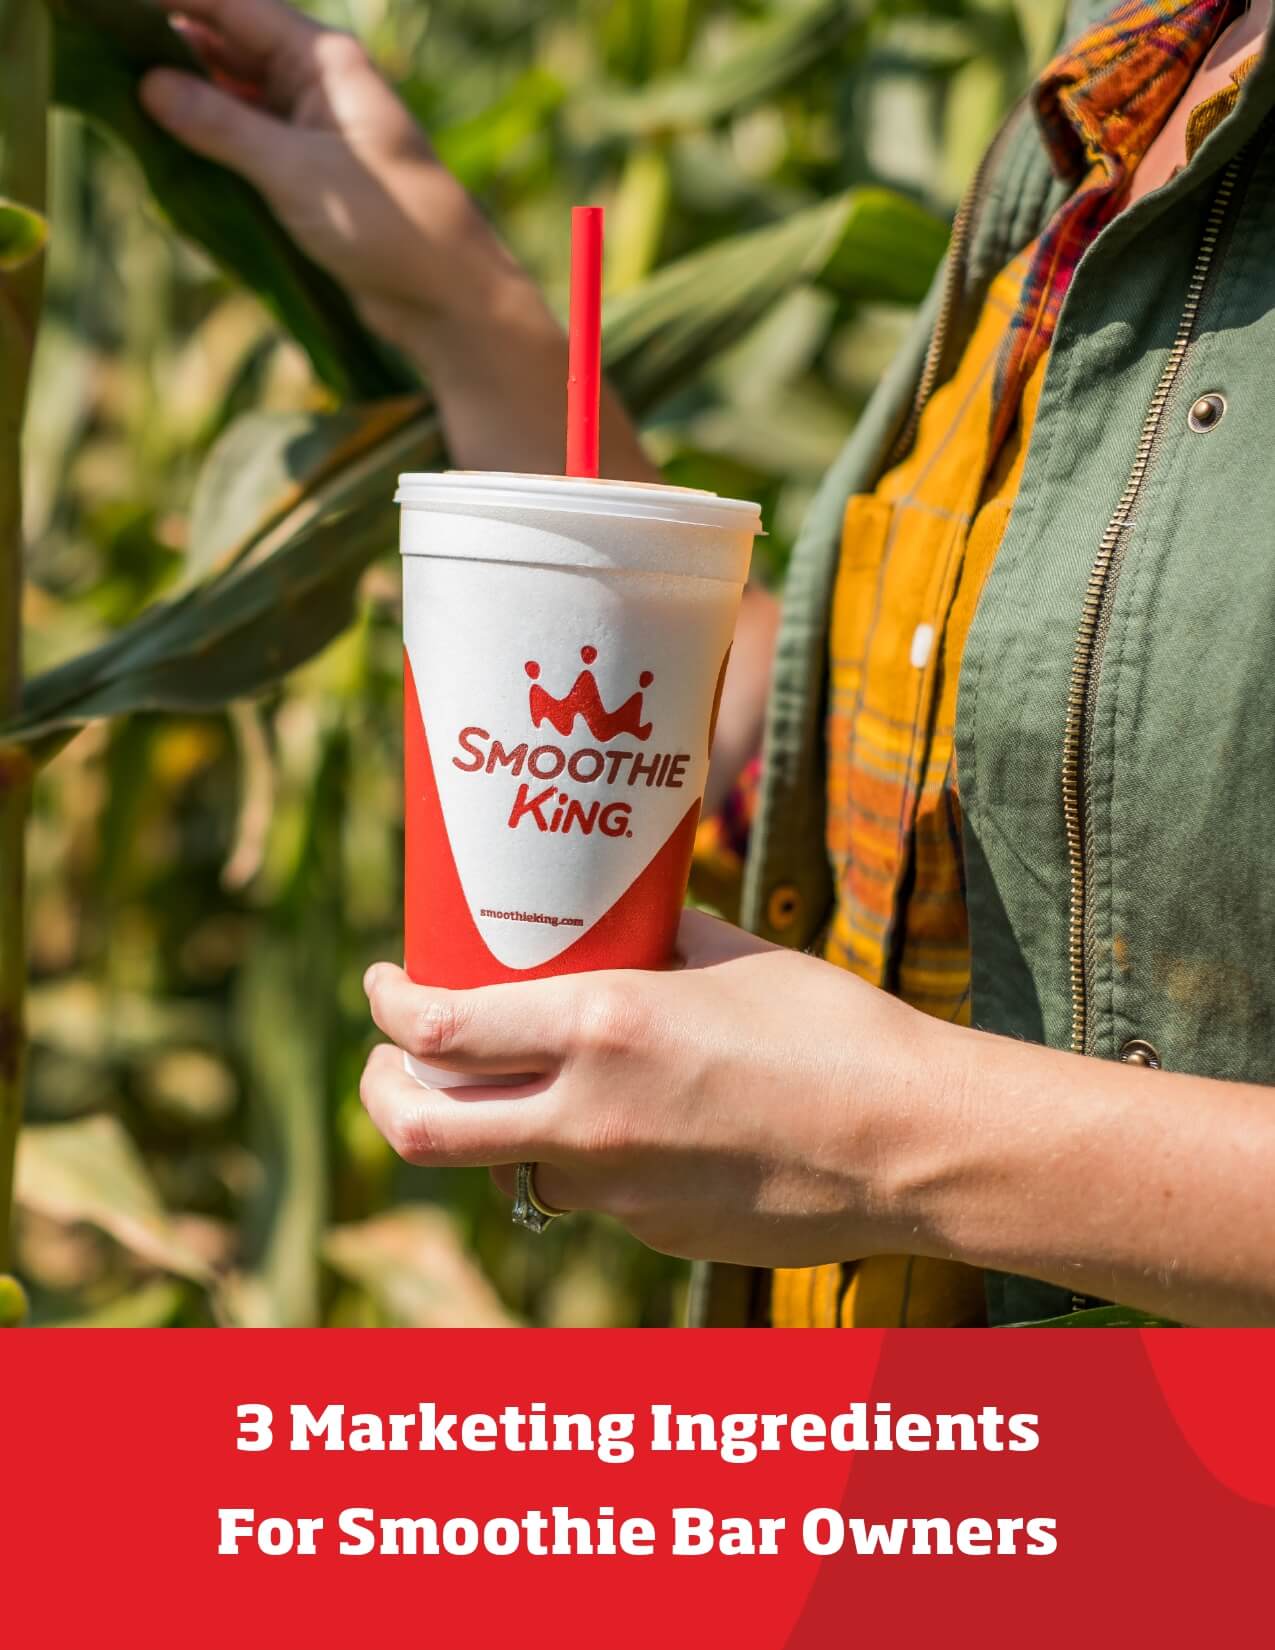 3 Critical Marketing Ingredients for Smoothie Bar Owners